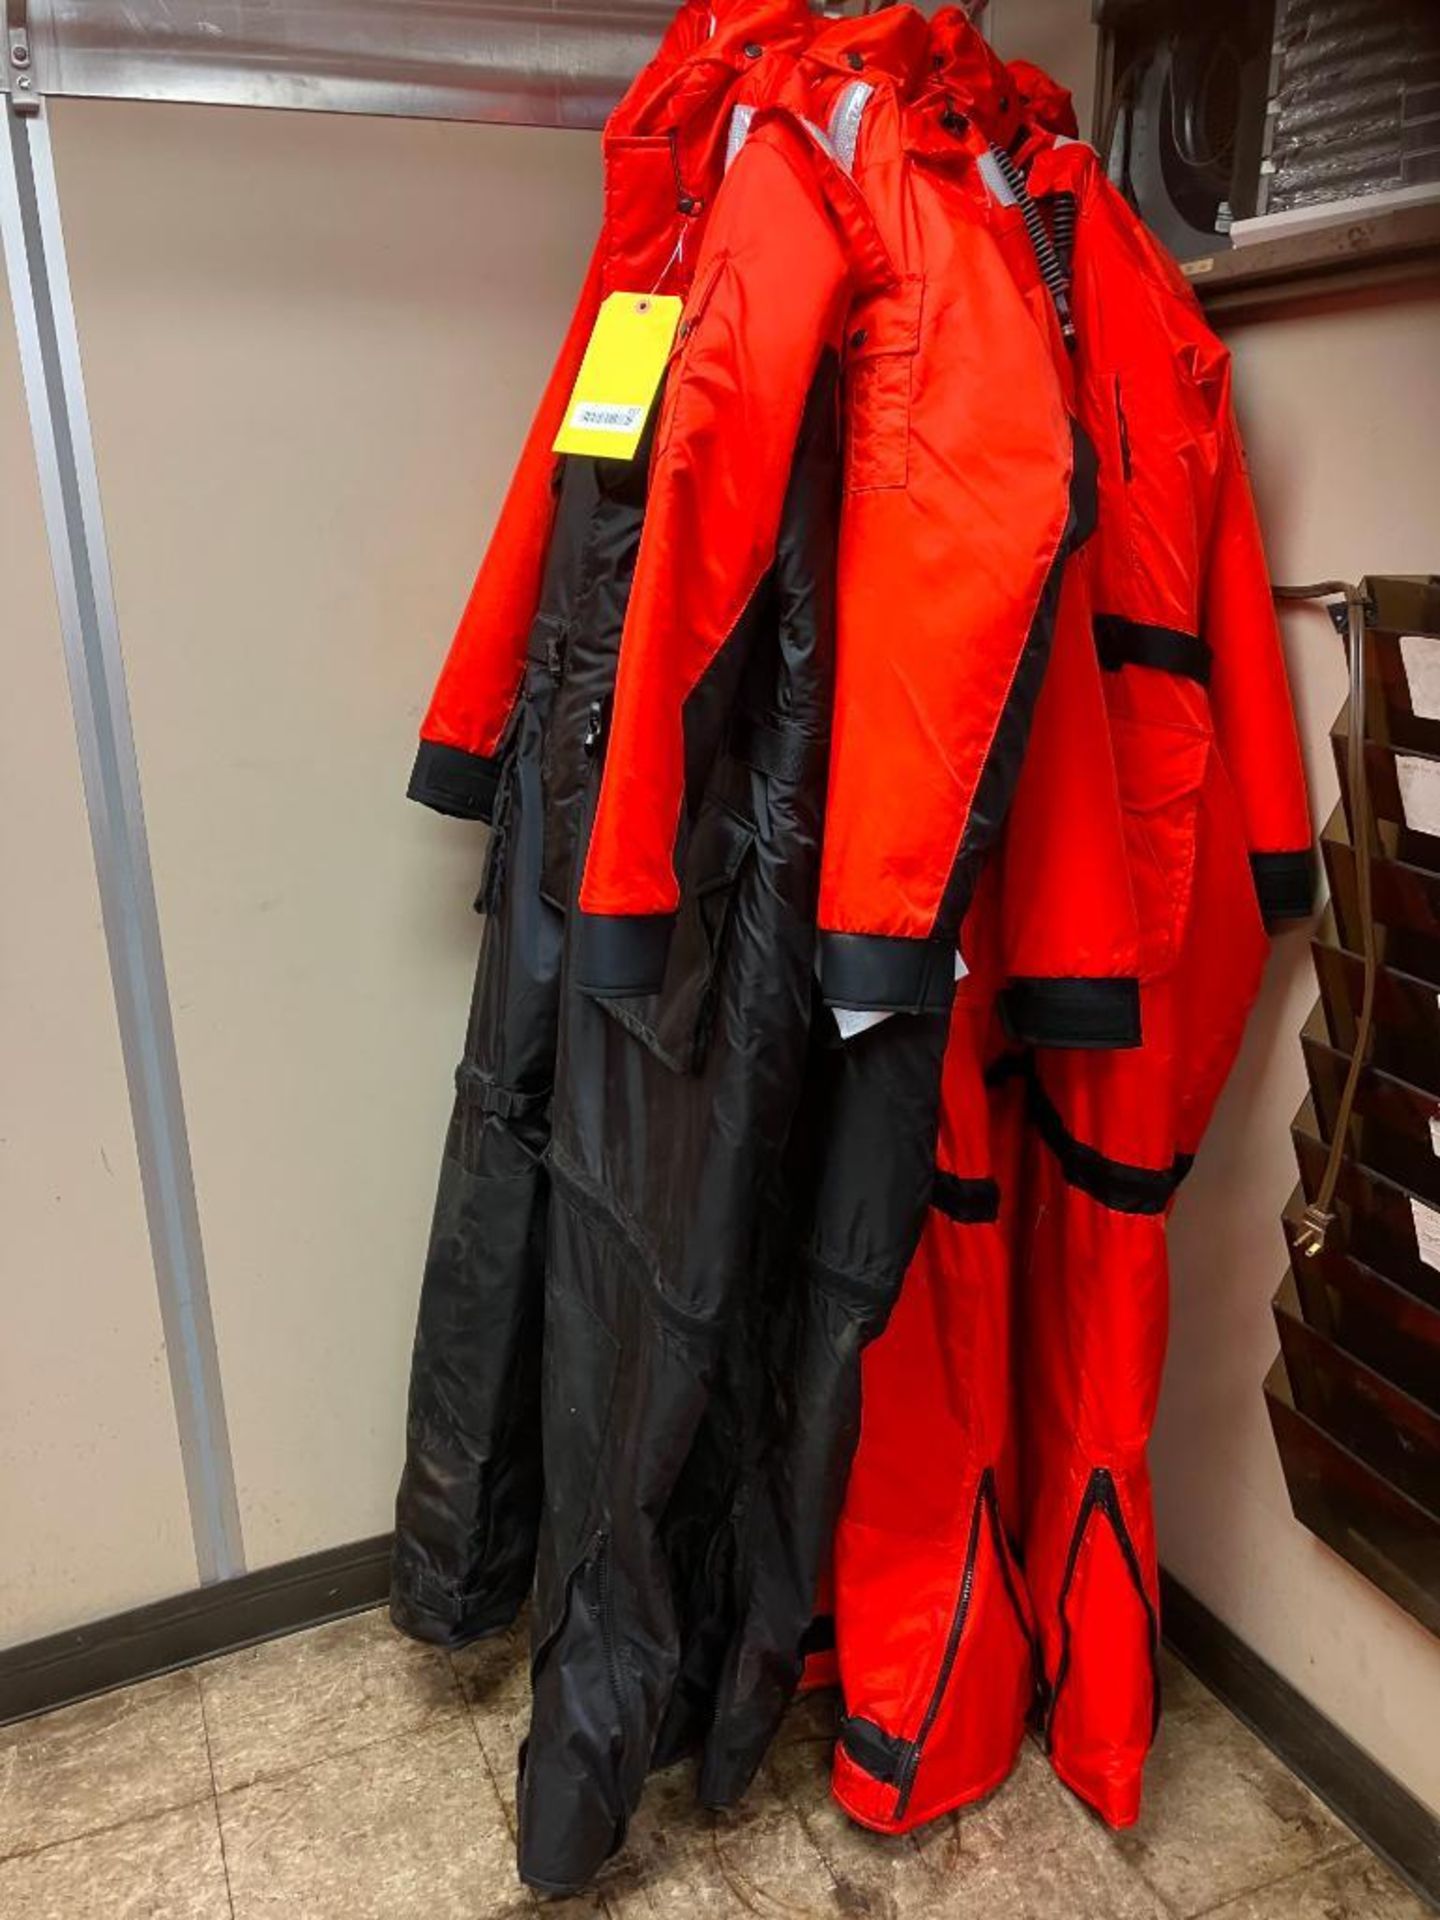 (4) MUSTANG SURVIVAL MS2175 DELUXE ANTI-EXPOSURE WORK SUITS: (2) XX LARGE, (2) XXX LARGE - Image 2 of 2